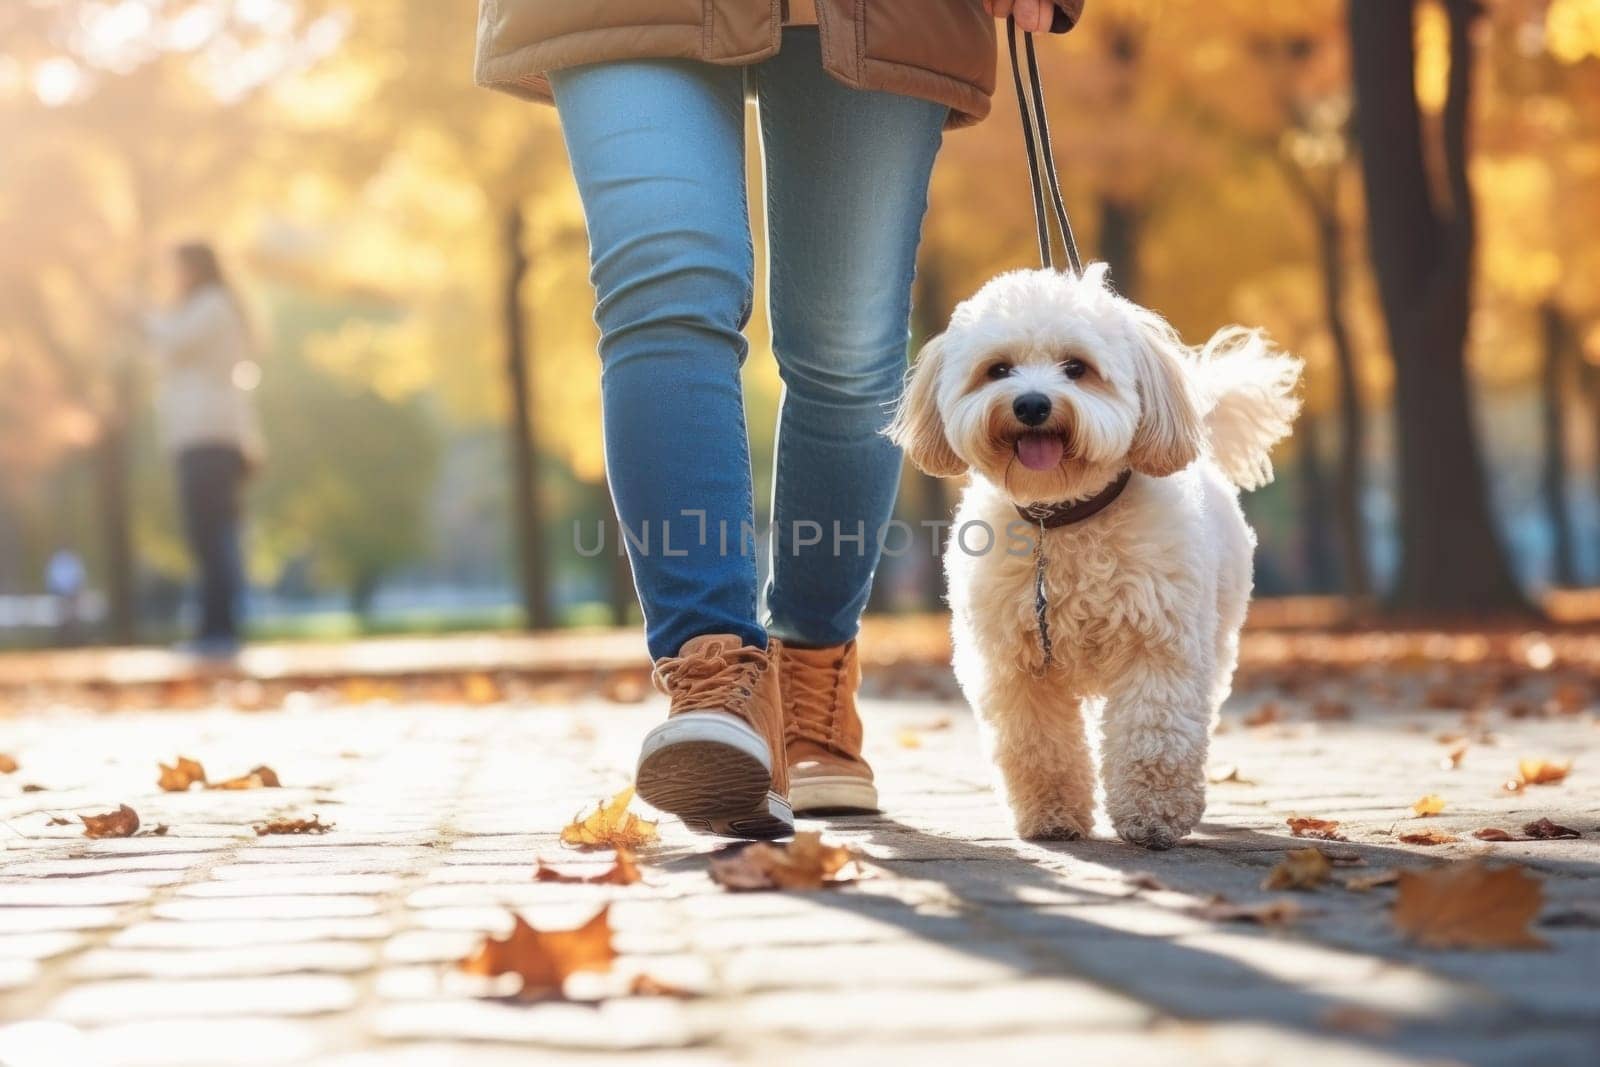 image of a person walking a pet dog in a city park on a sunny autumn day by nijieimu